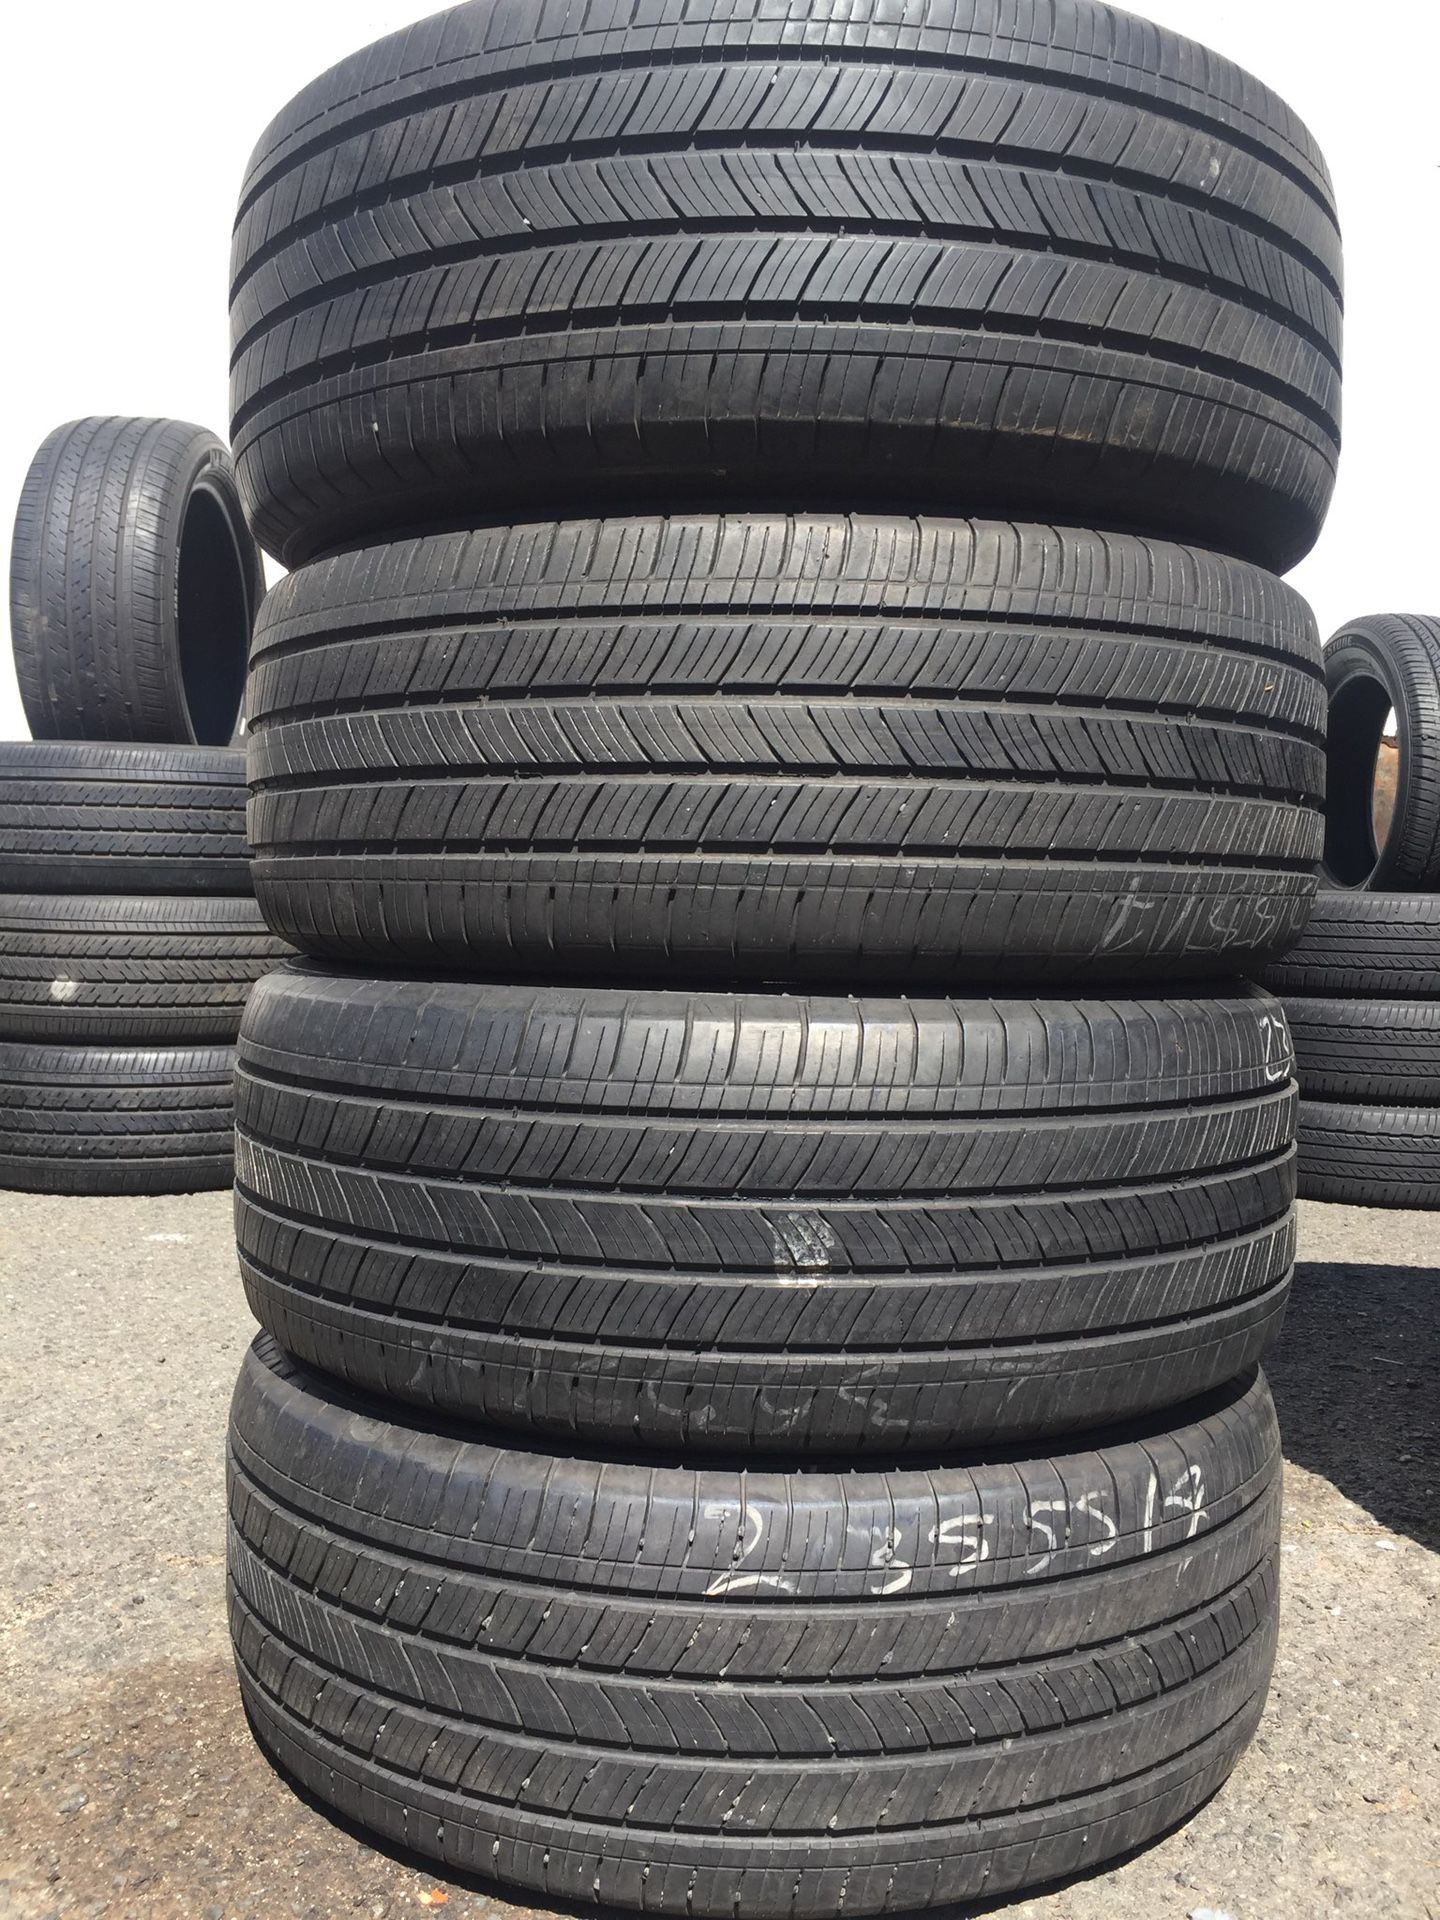 235/55/17 Michelin set of used tires in great condition 70% tread 200$ for 4 . Installation balance and alignment available. Road force balance avai